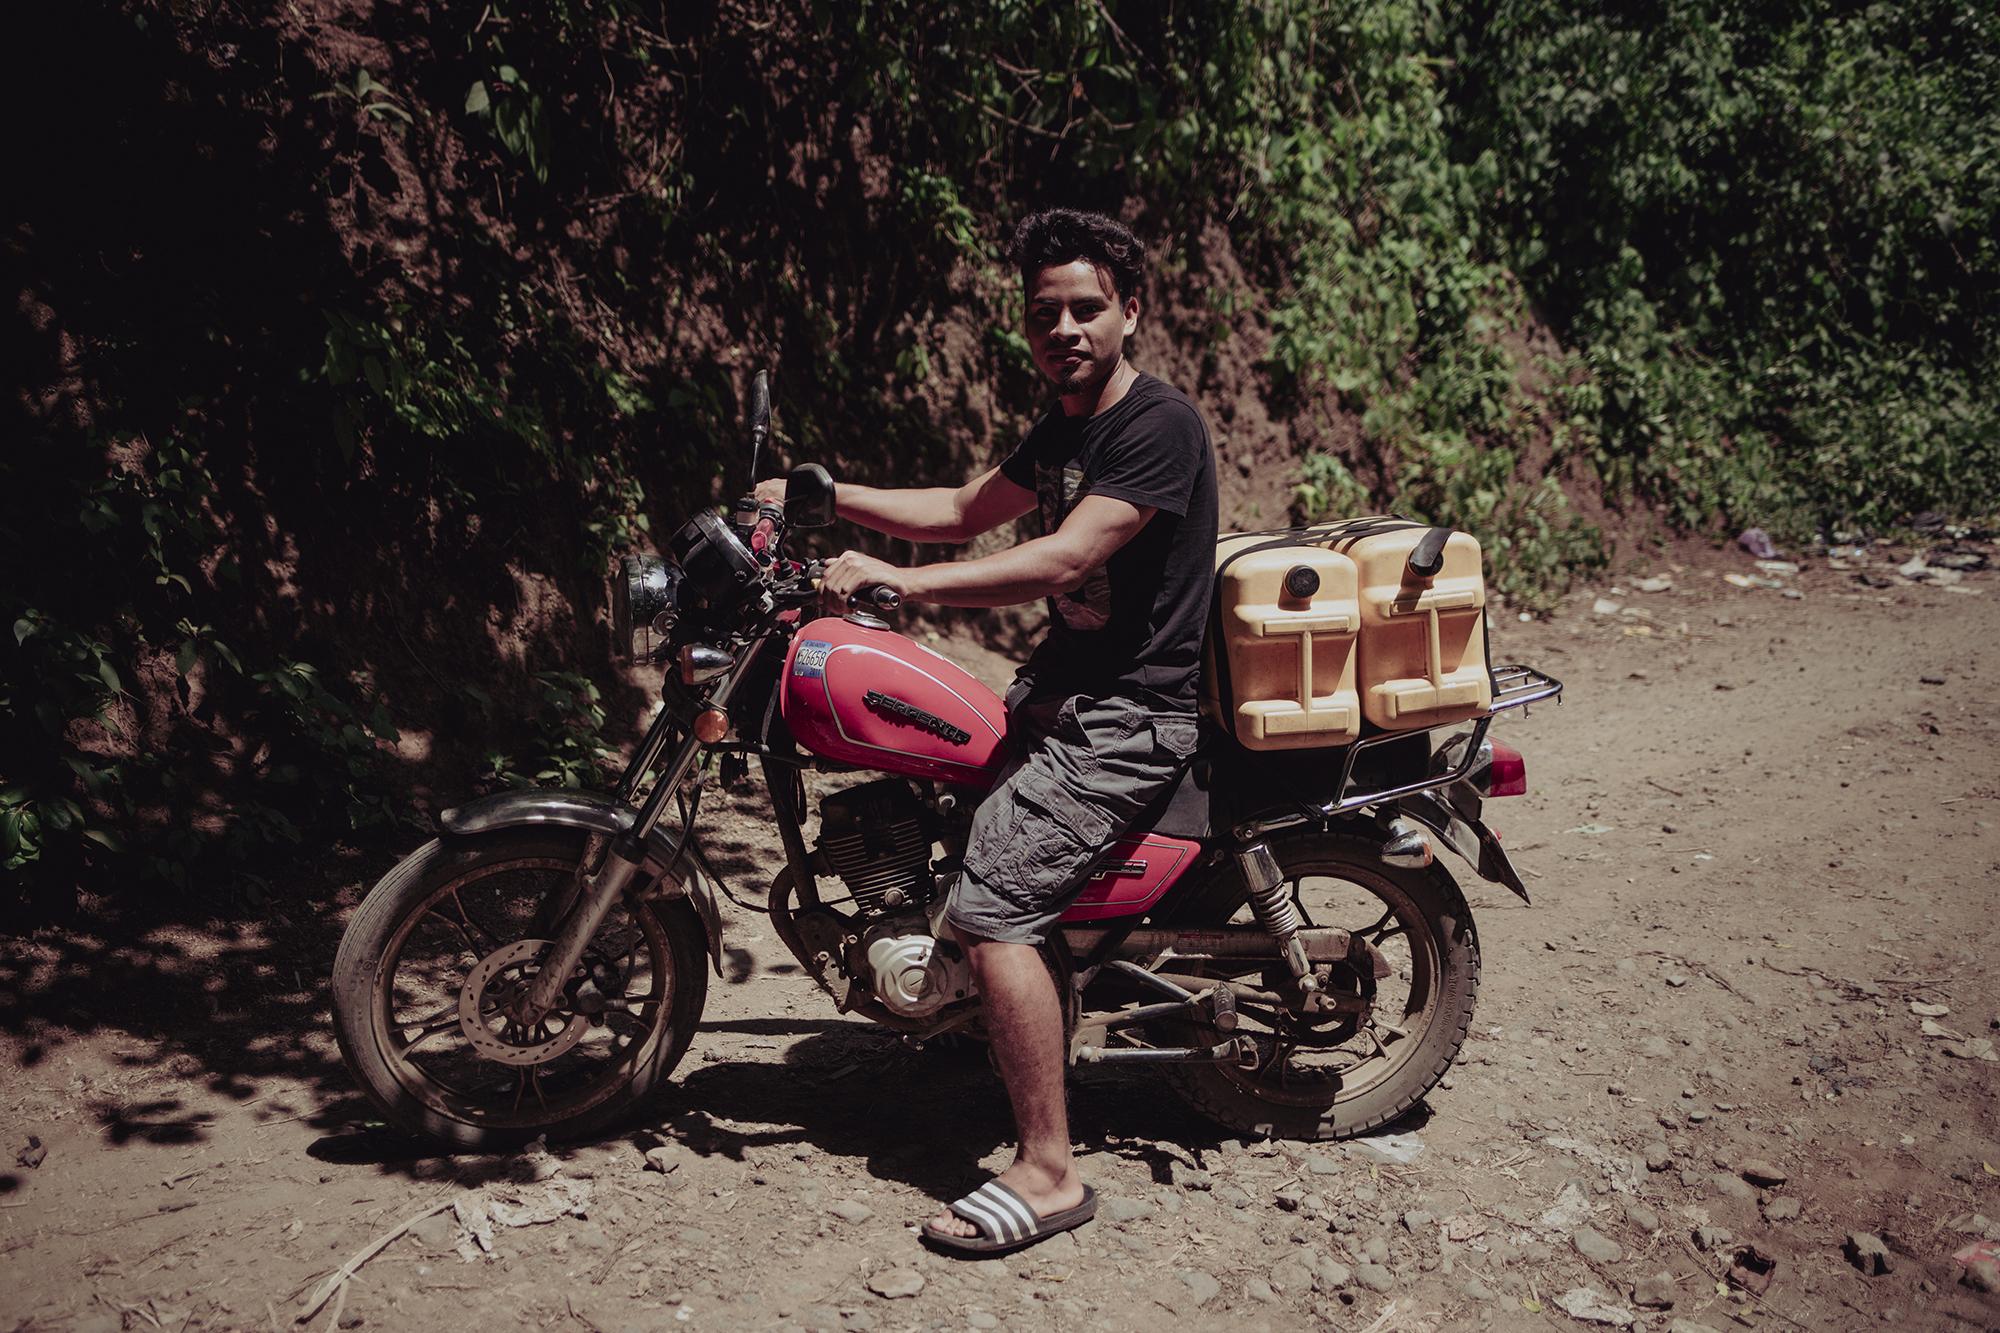 Melvin Alvarenga travels by motorcycle every two days to a water source in the canton of Las Delicias. The Alvarenga family uses the spring water exclusively for drinking. Photo: Carlos Barrera/El Faro.